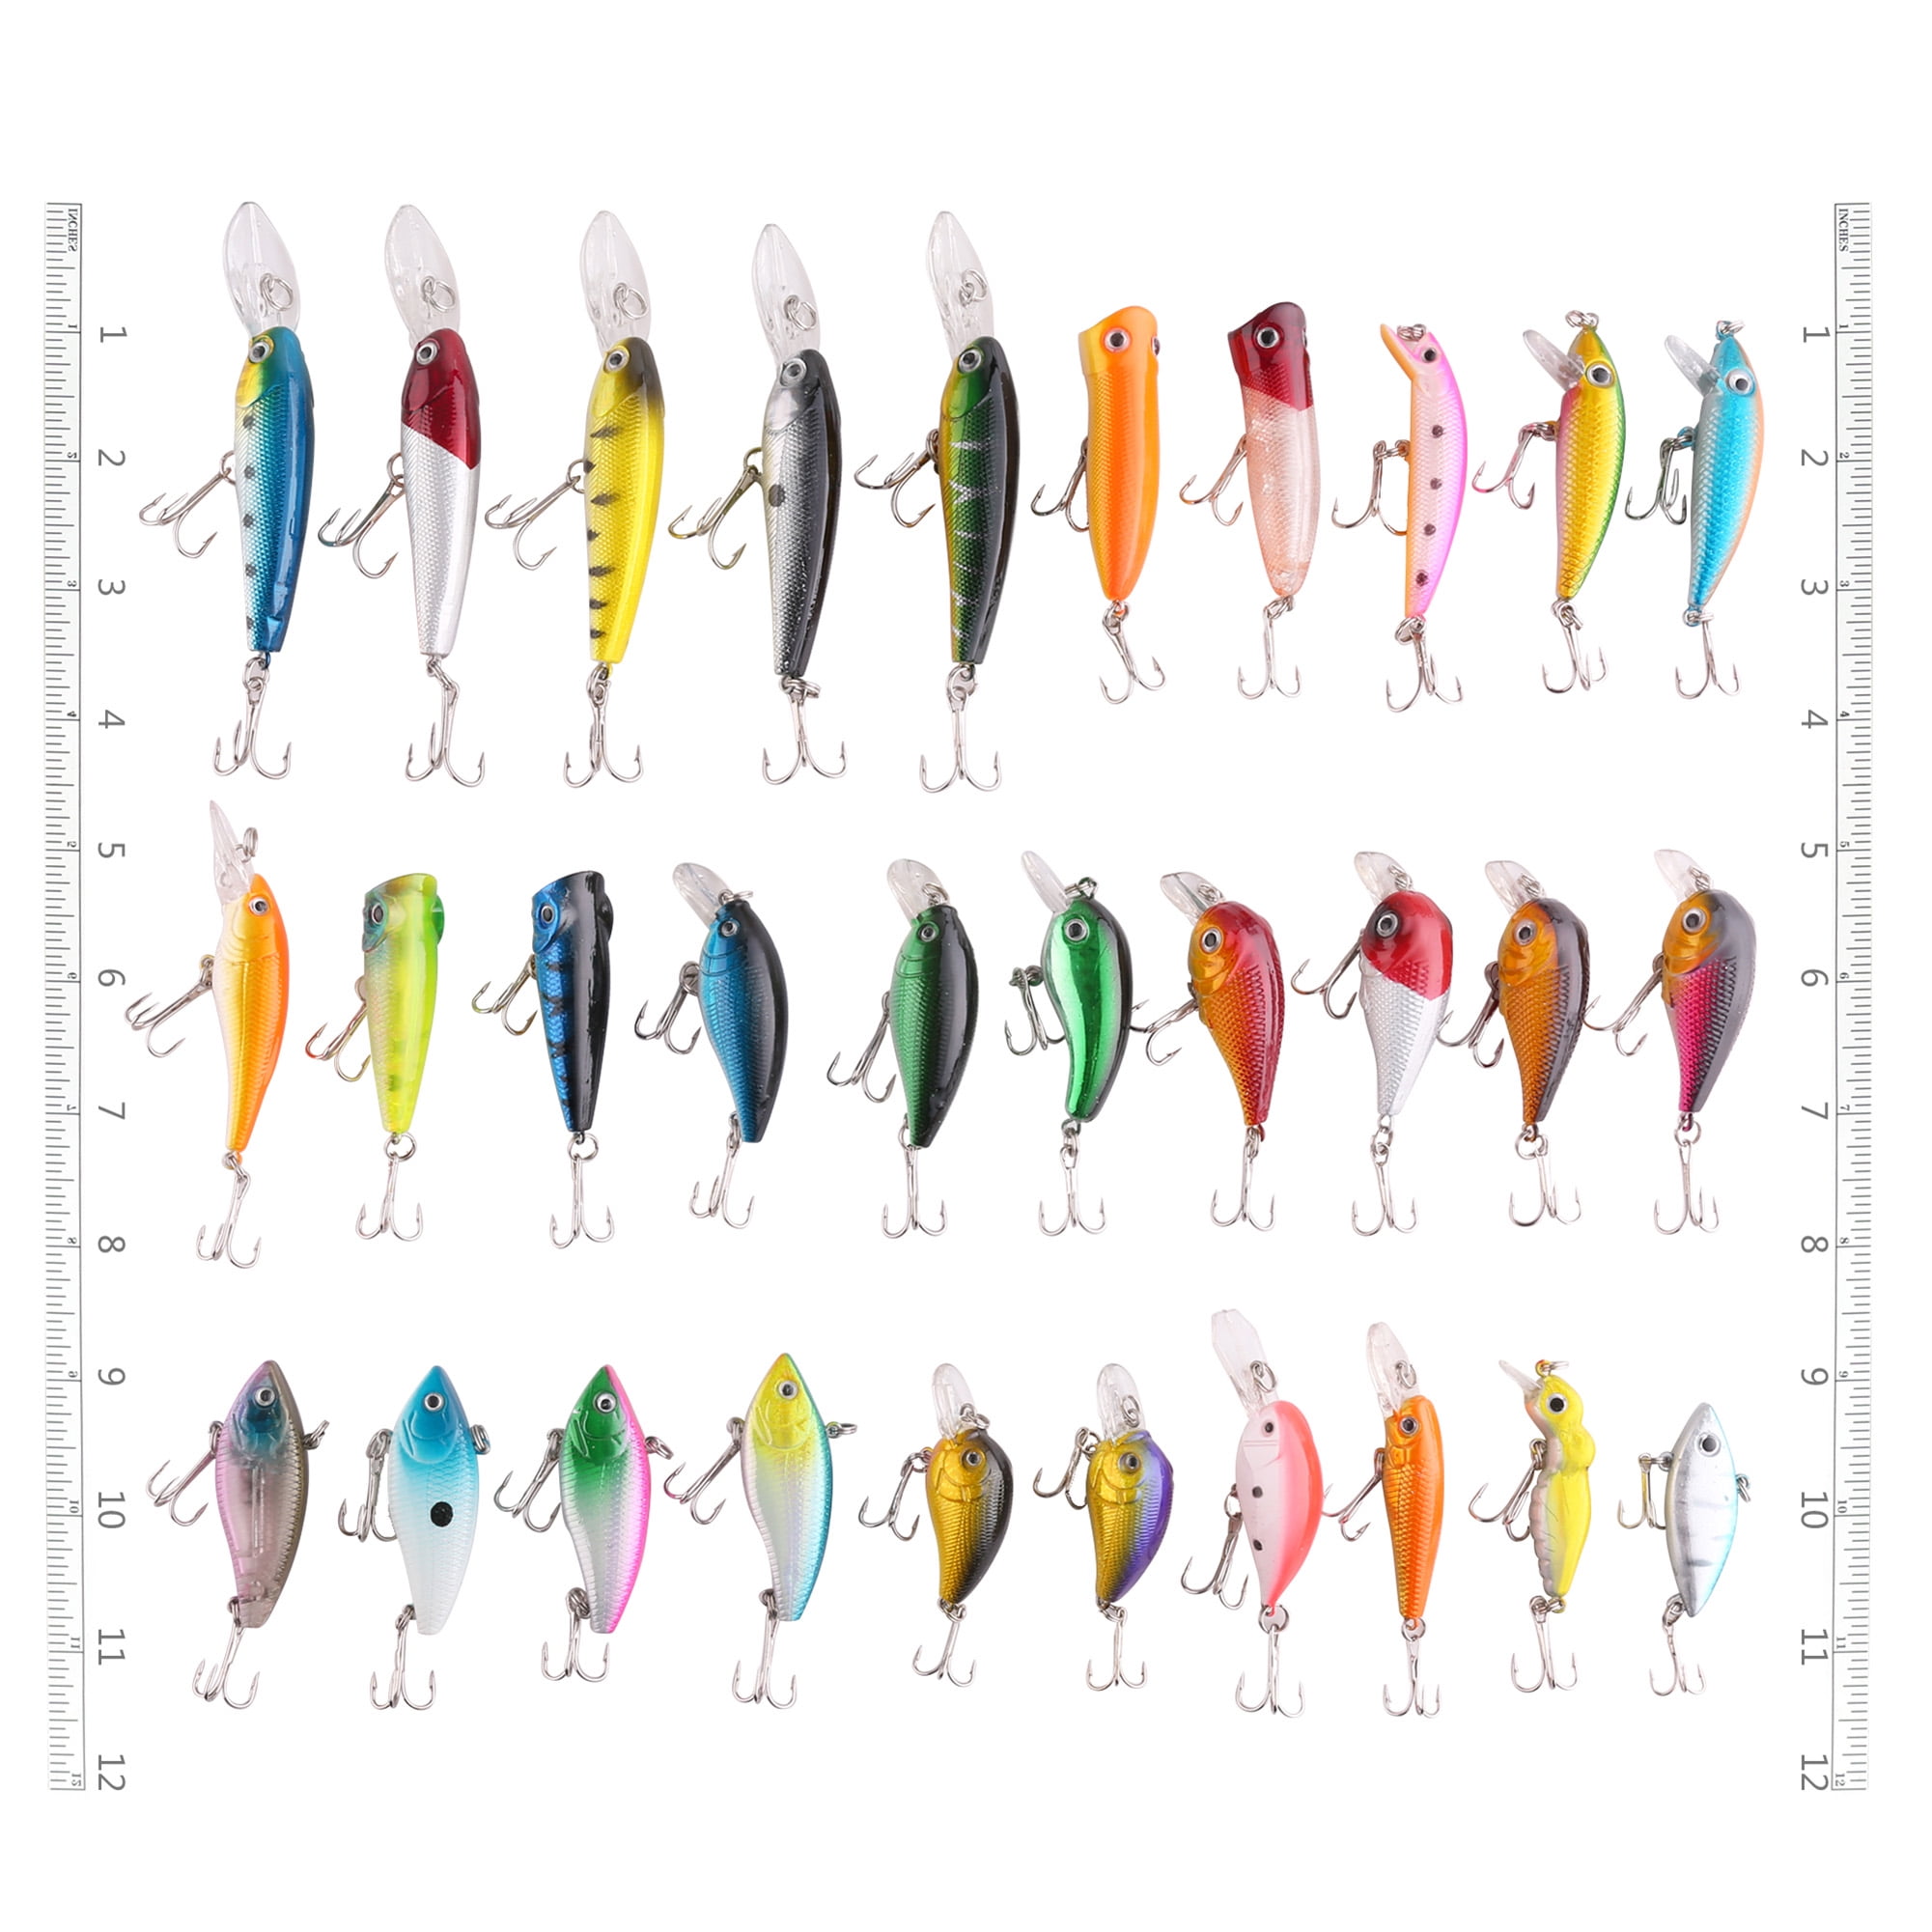 MagBay Lures Deep Drop Weights - Offshore Fishing - Swordfish & Cod Weights  